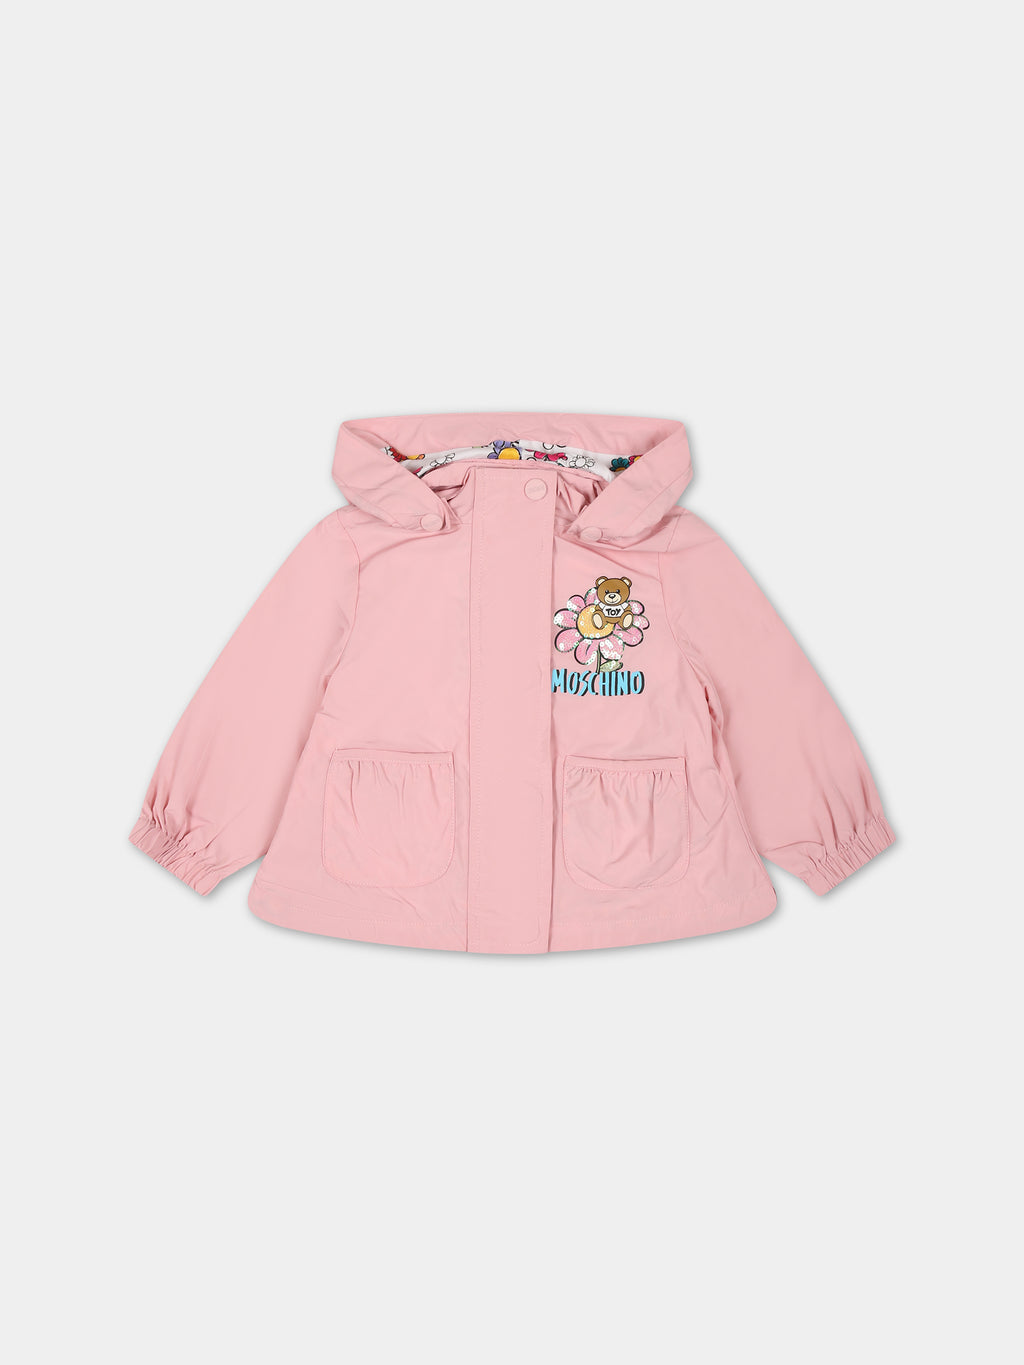 Pink raincoat for baby girl with Teddy Bear and logo